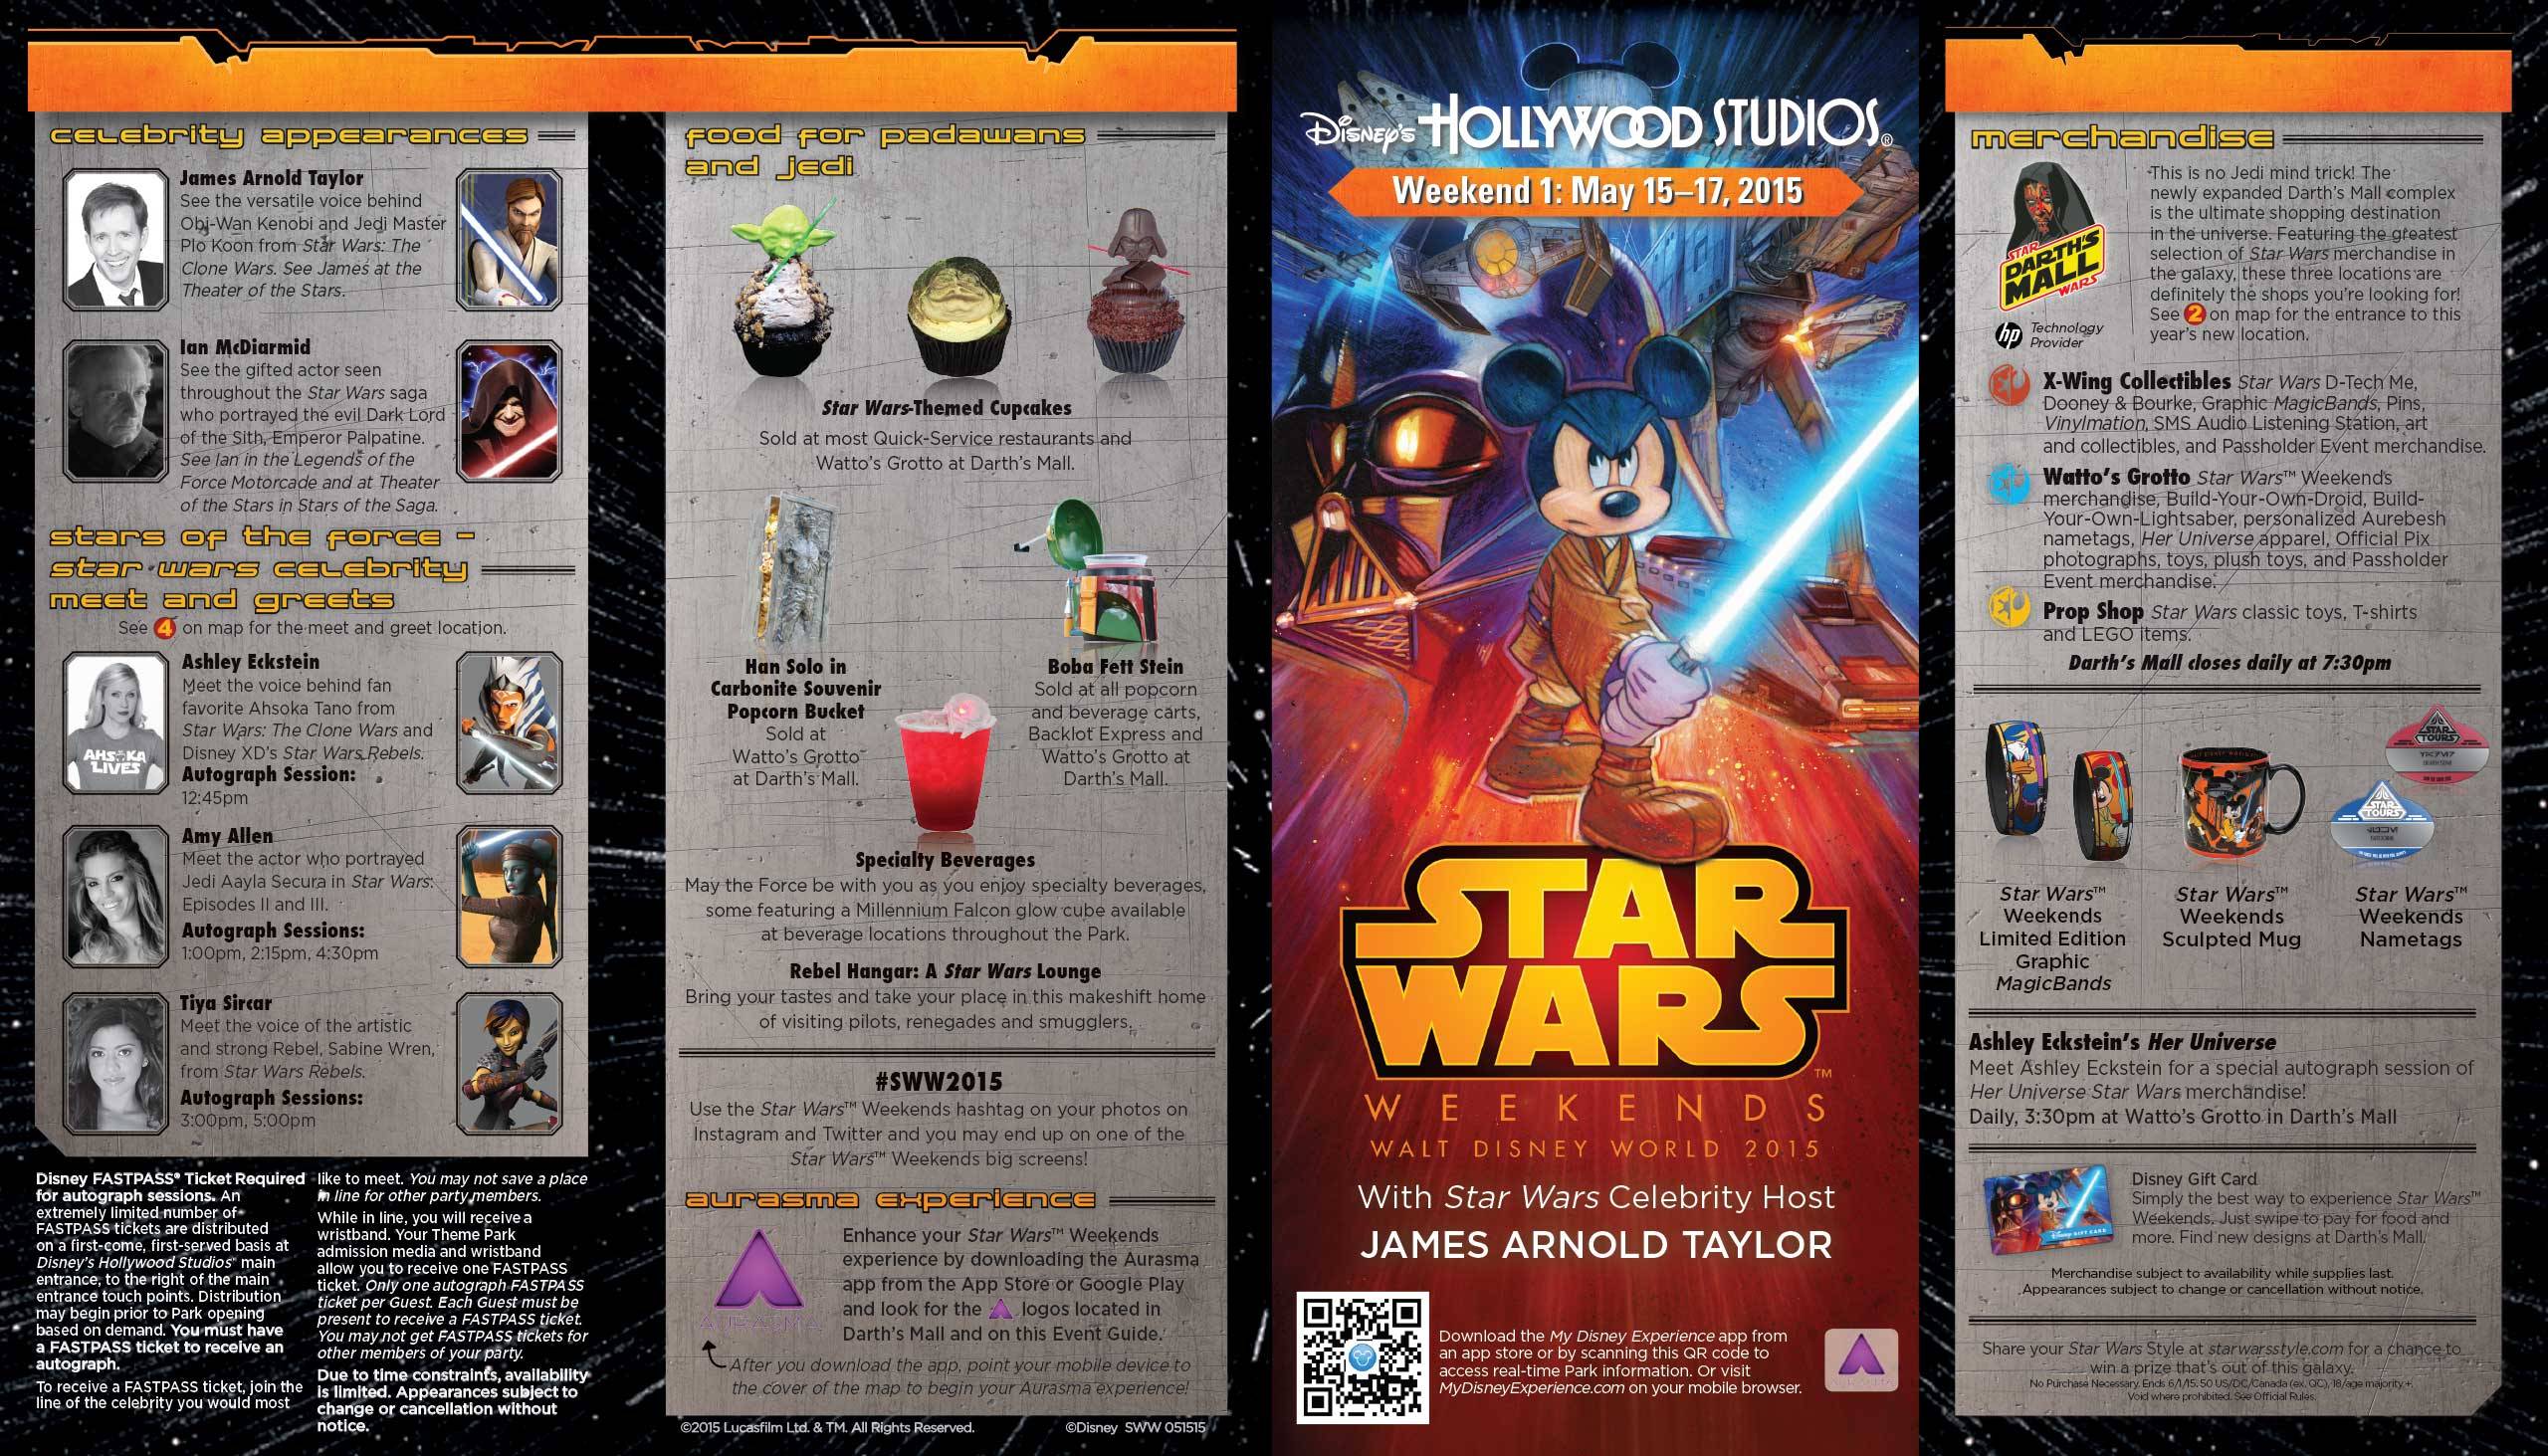 2015 Star Wars Weekends May 15-17 Weekend 1 guide map - Front